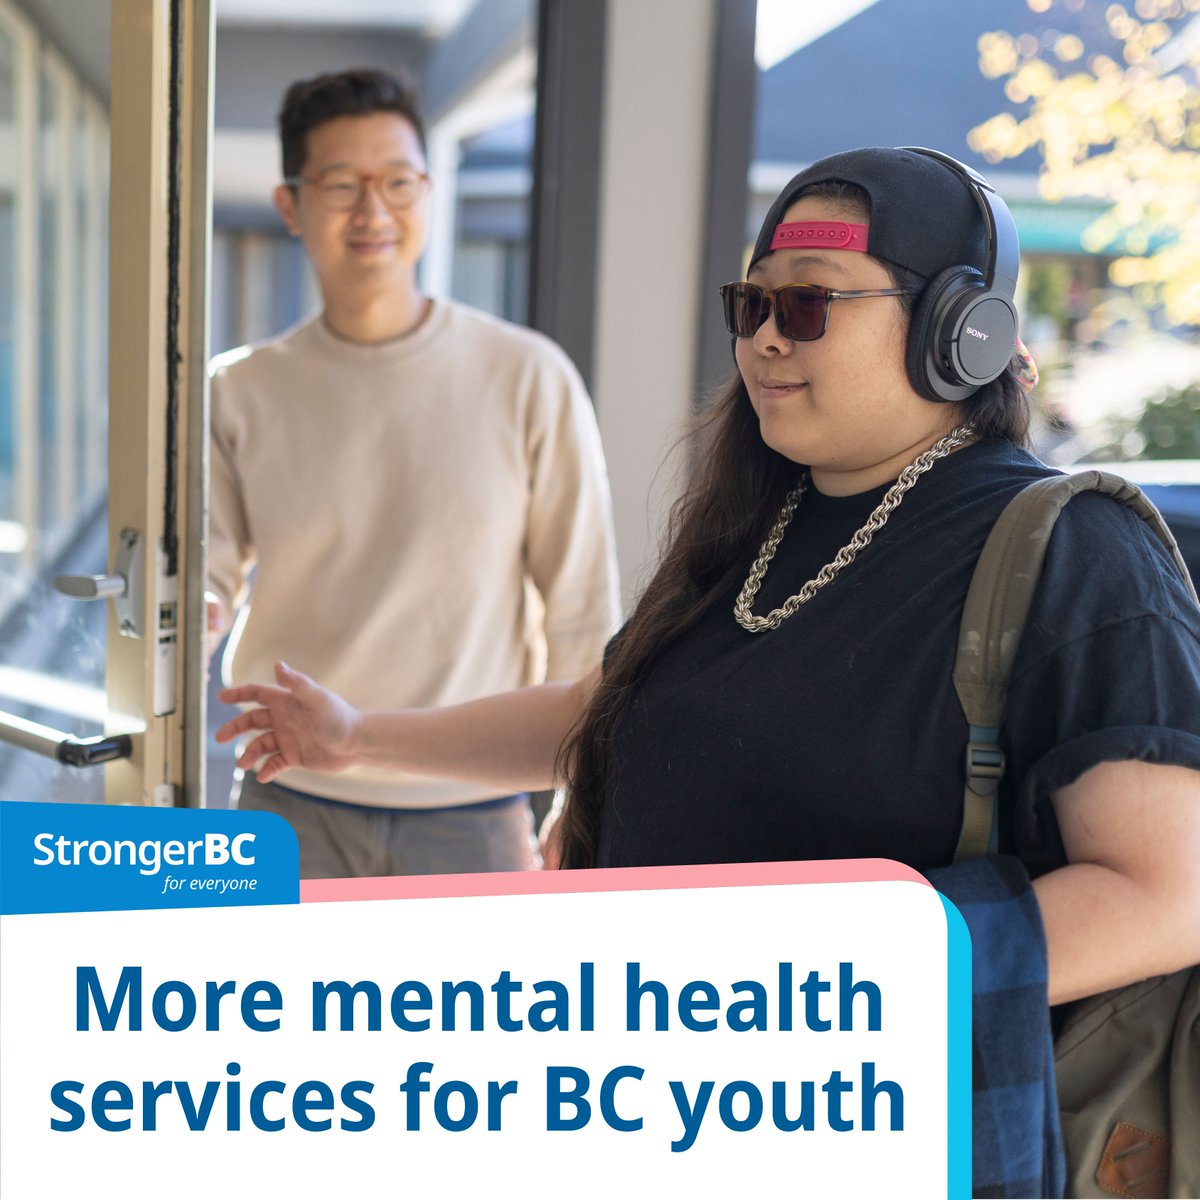 It can be hard for young people to find the safe and supportive #MentalHealth services that meet their needs. 12 new @Foundrybc centres will help youth & their families get easier access to mental health support & addiction services in more BC communities. FoundryBC.ca